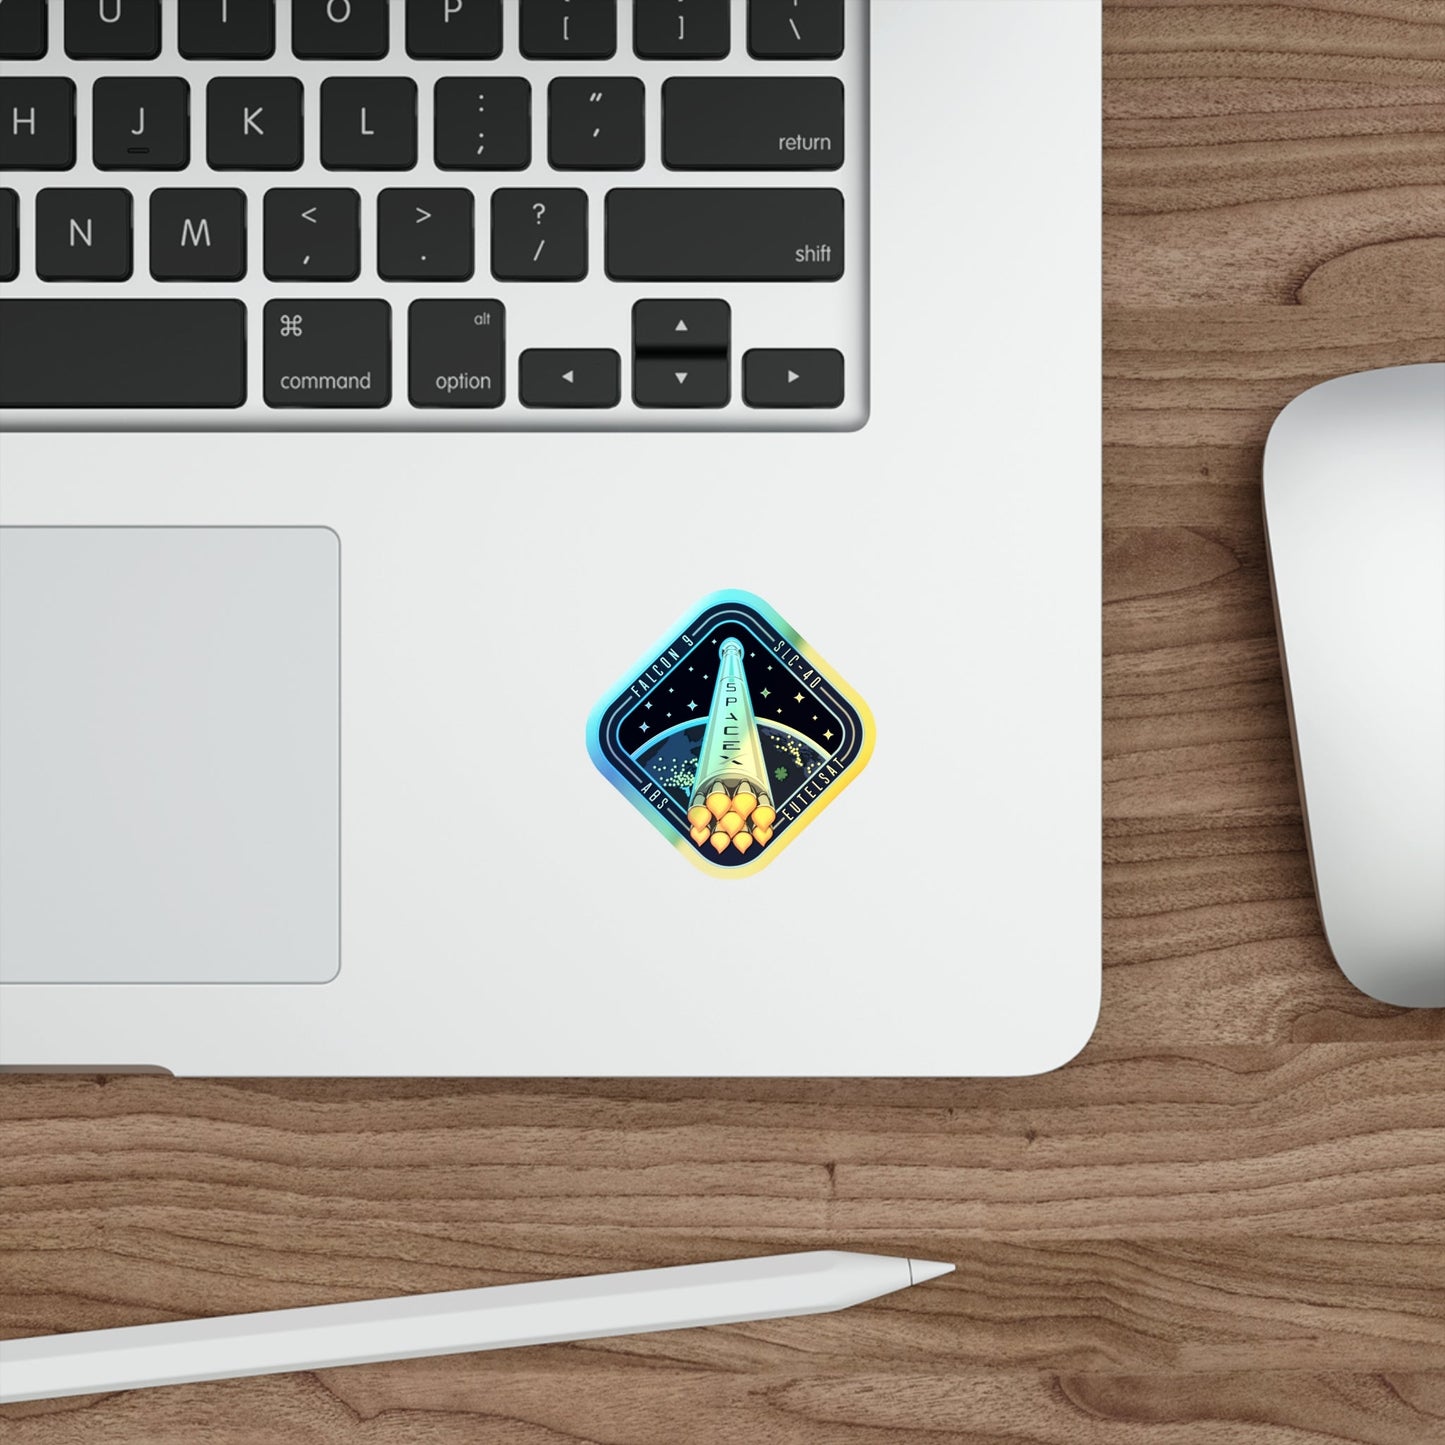 Cape Canaveral SpaceX Eutelsat 115 West B Falcon 9 Mission (SpaceX) Holographic STICKER Die-Cut Vinyl Decal-The Sticker Space